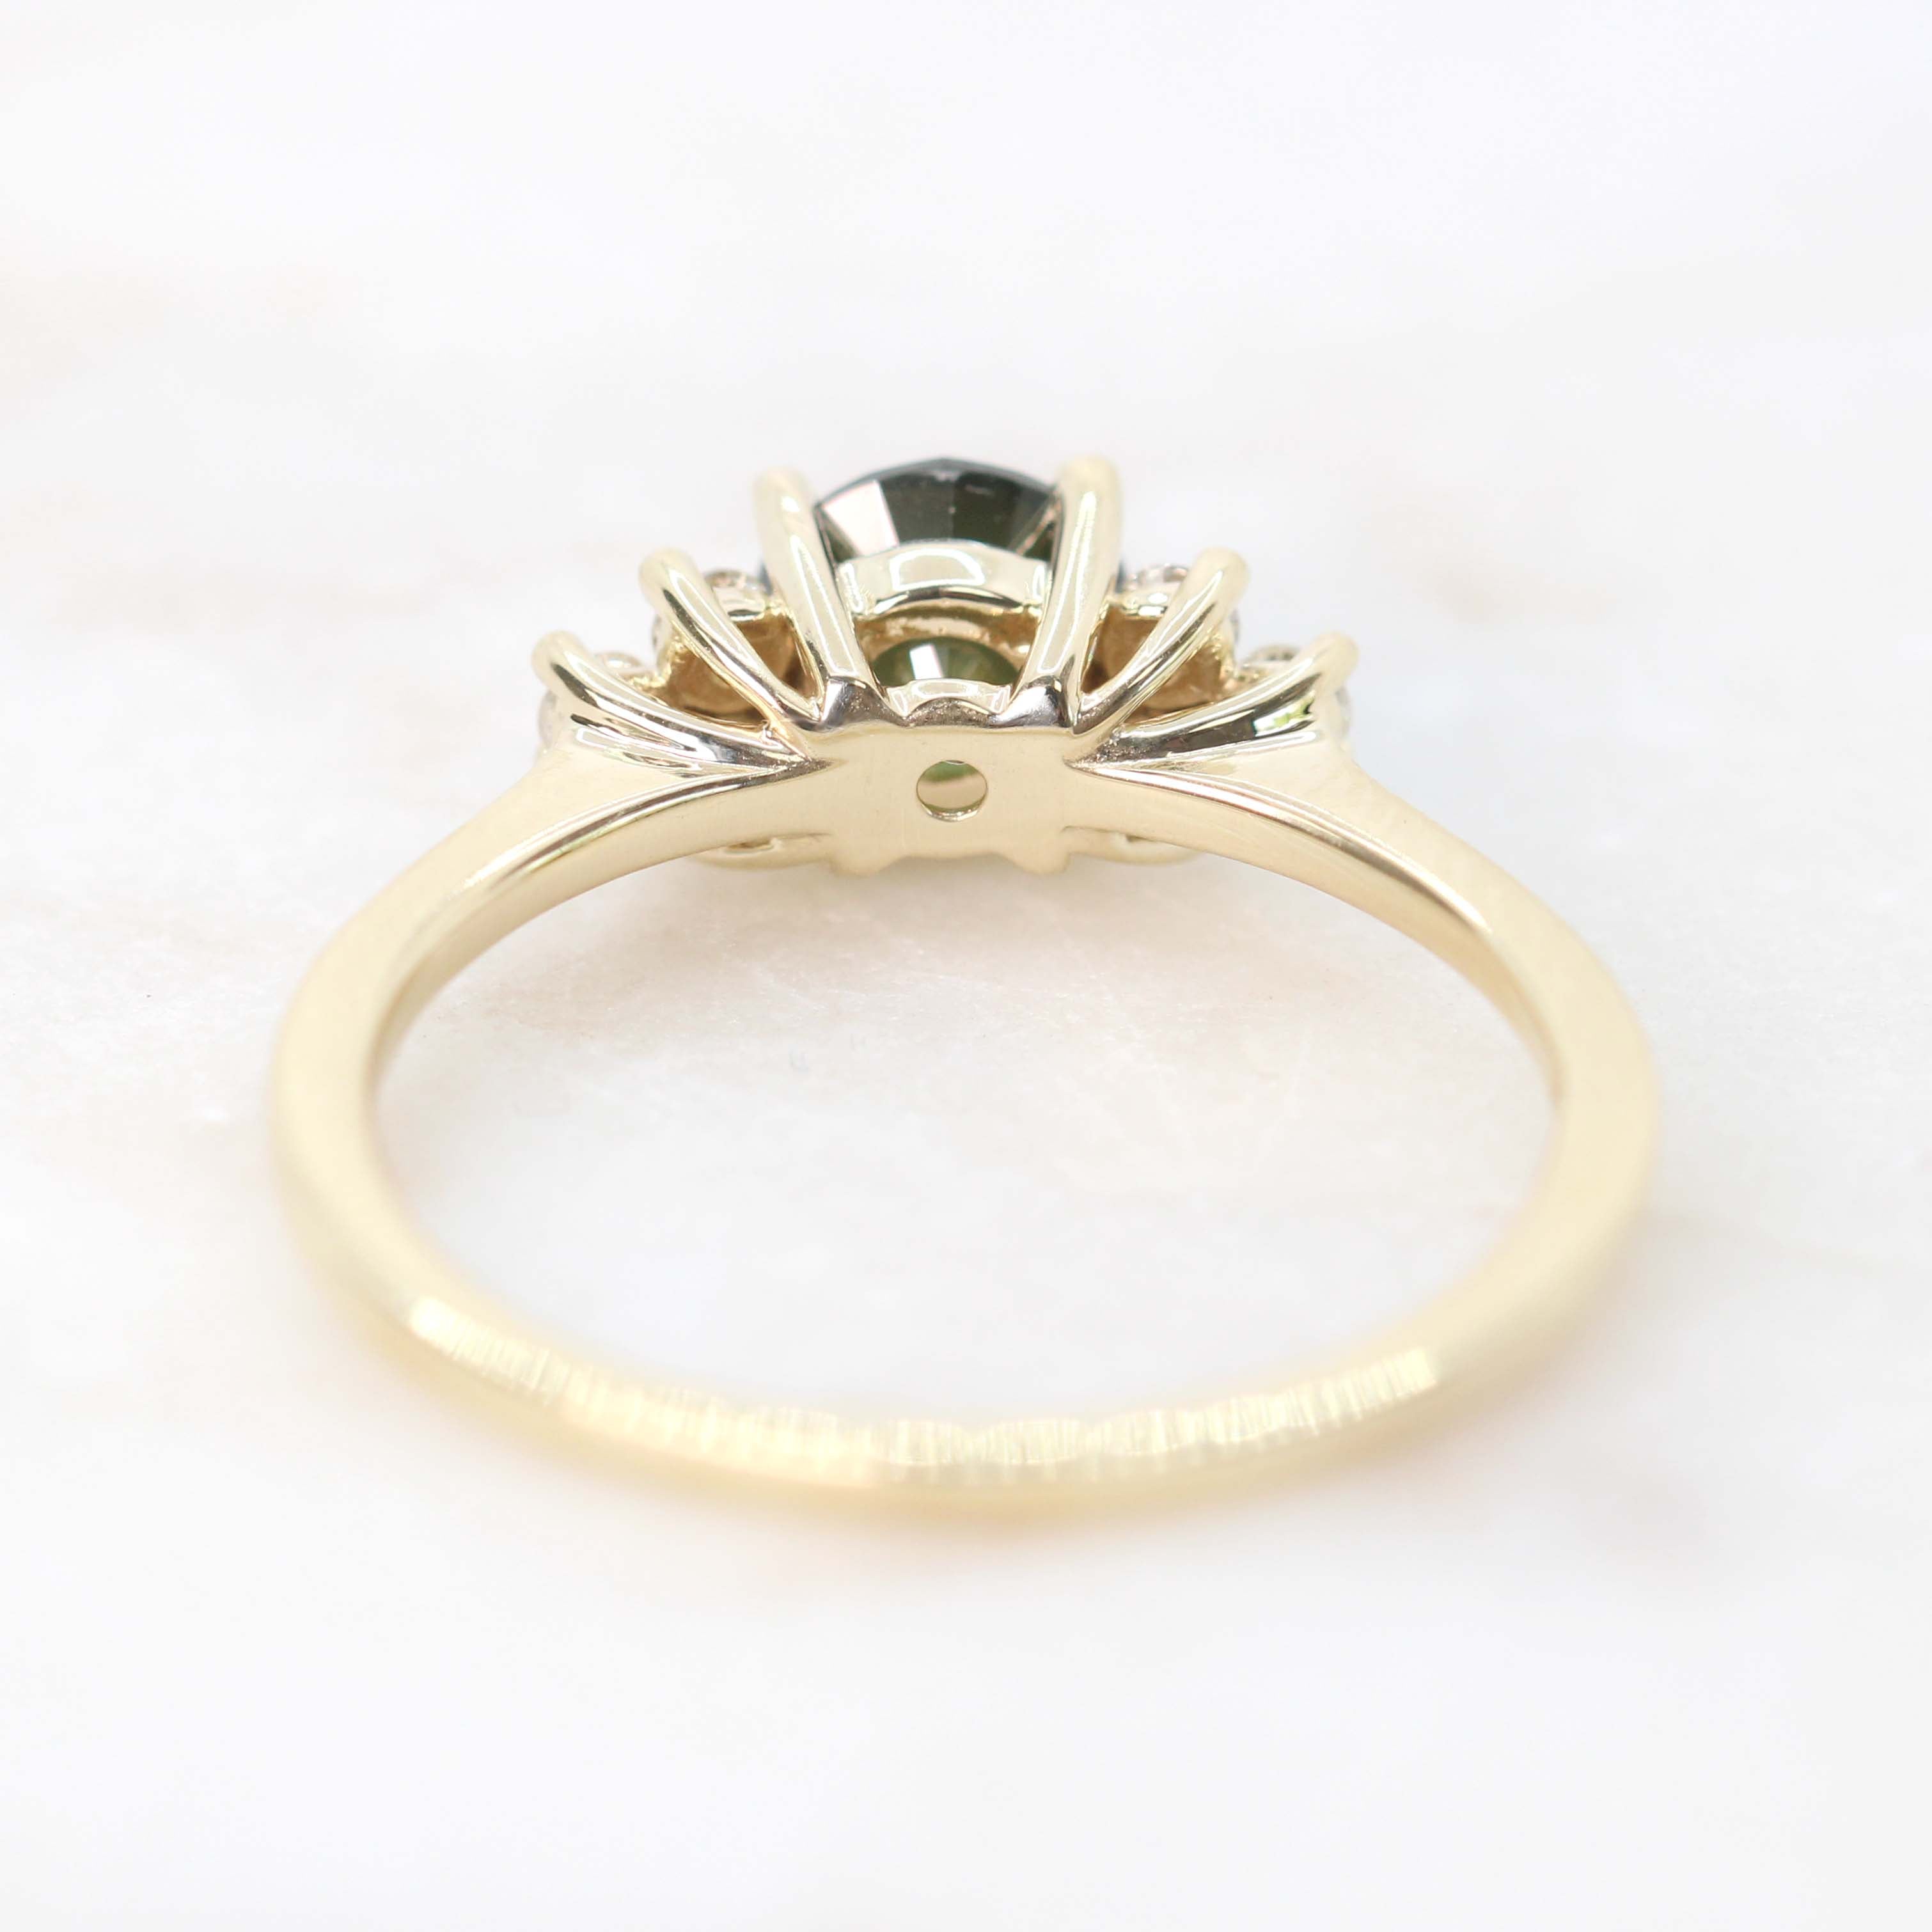 Veragene Ring with a 0.93 Carat Round Black Celestial Diamond in 14k Yellow Gold - Ready to Size and Ship - Midwinter Co. Alternative Bridal Rings and Modern Fine Jewelry